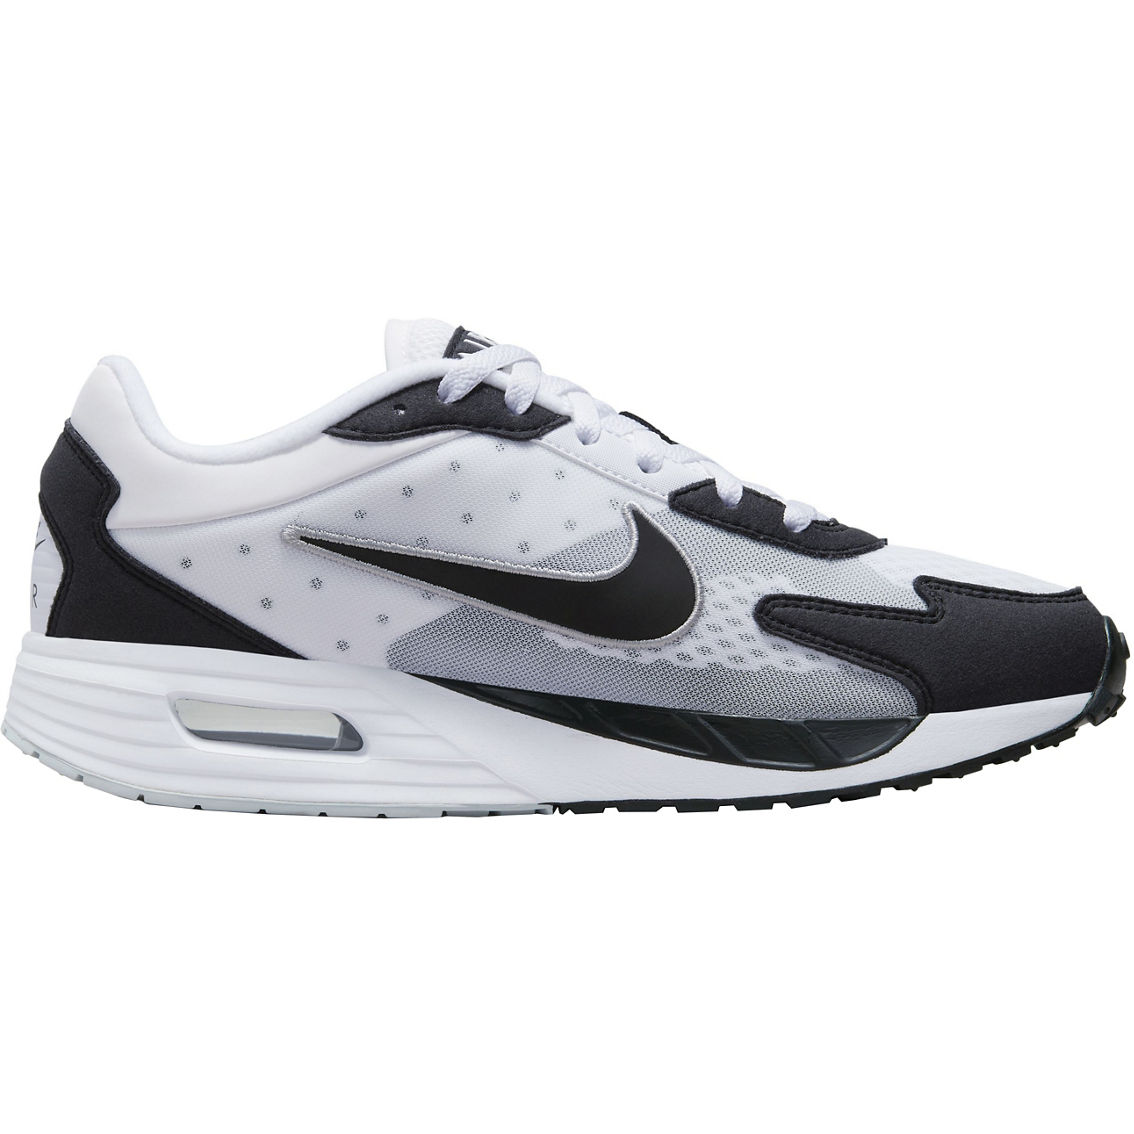 Nike Men's Air Max Solo Running Shoes - Image 2 of 10